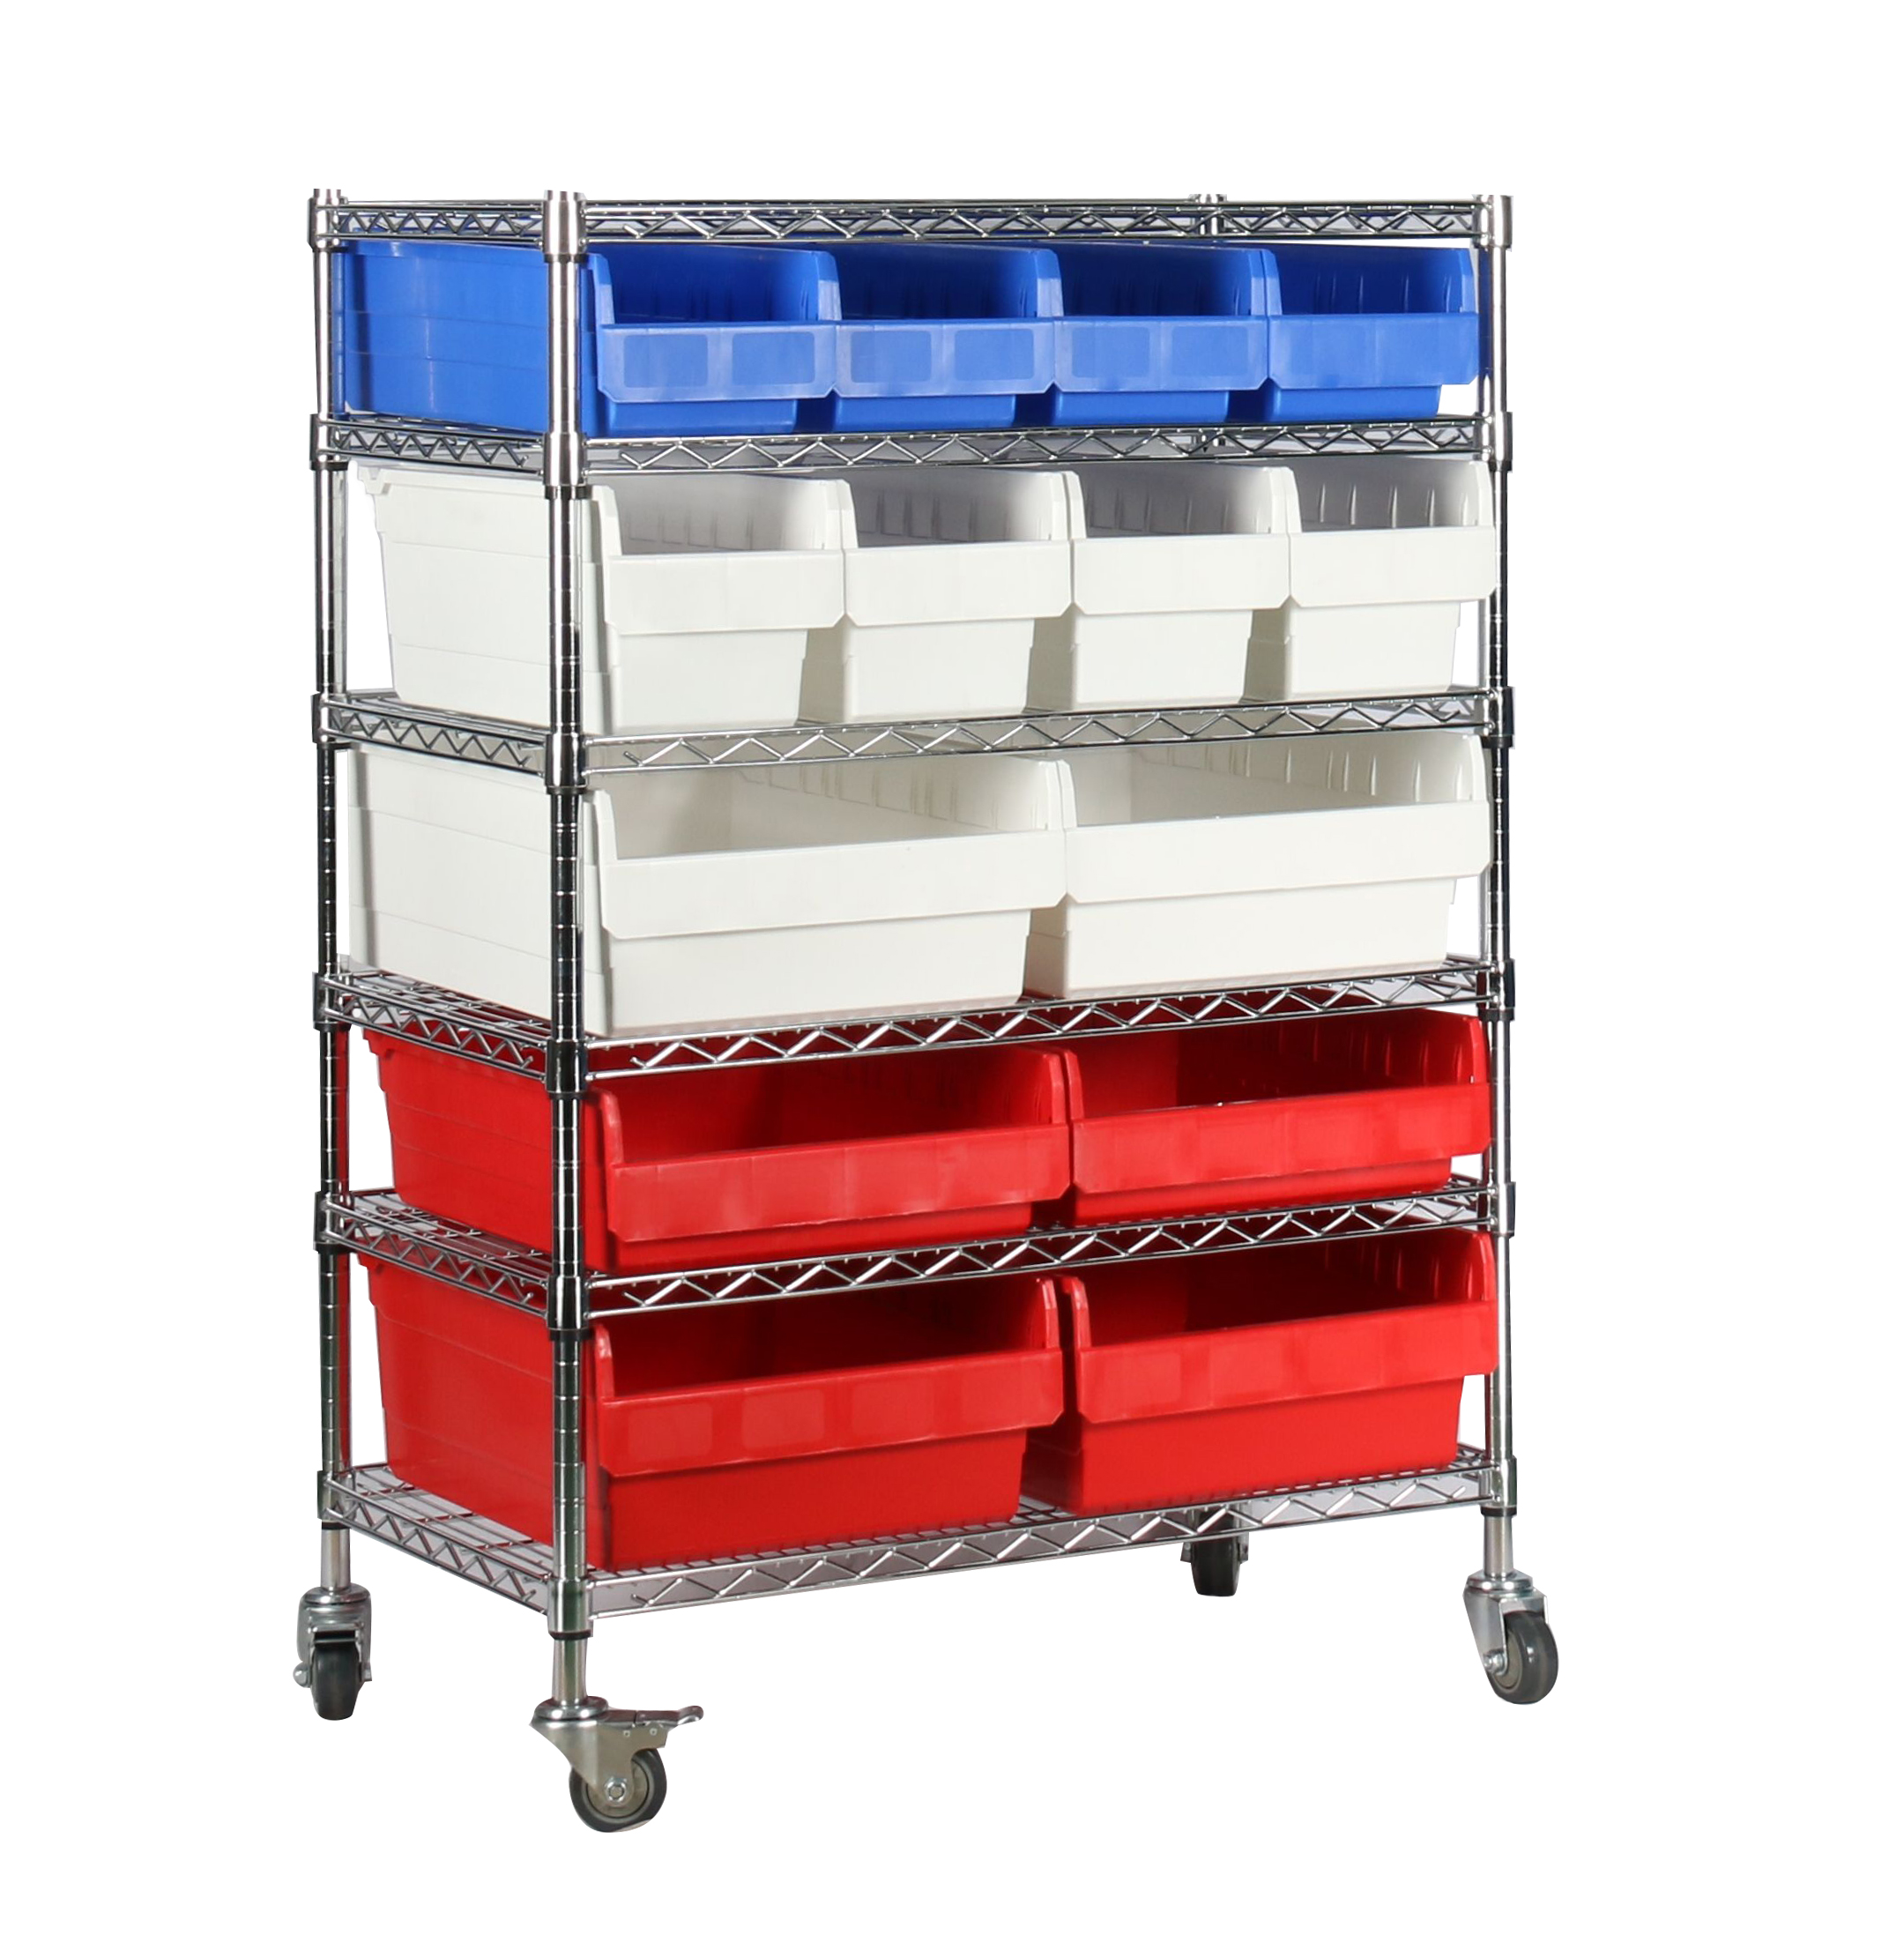 Pharmacy and healthcare storage solution for hospital